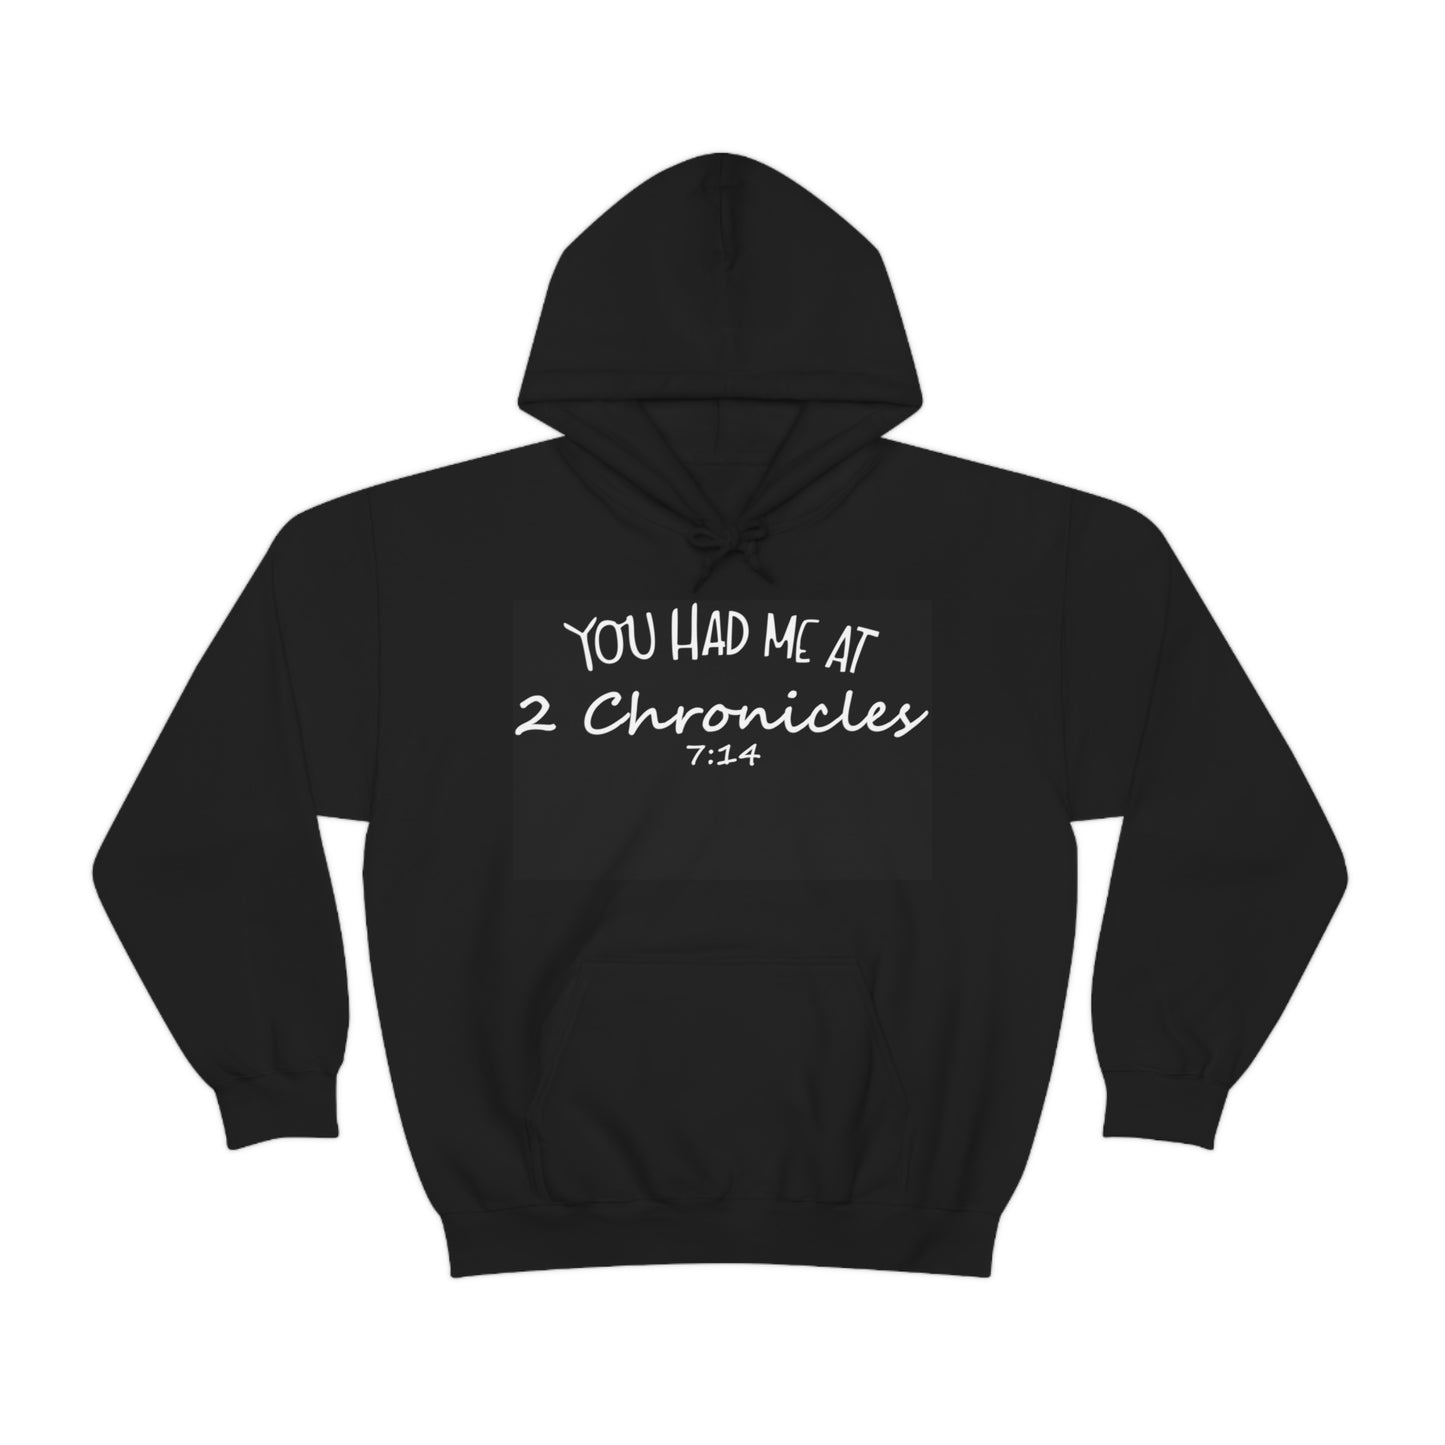 You Had Me At 2 Chronicles 7:14 Hoodie